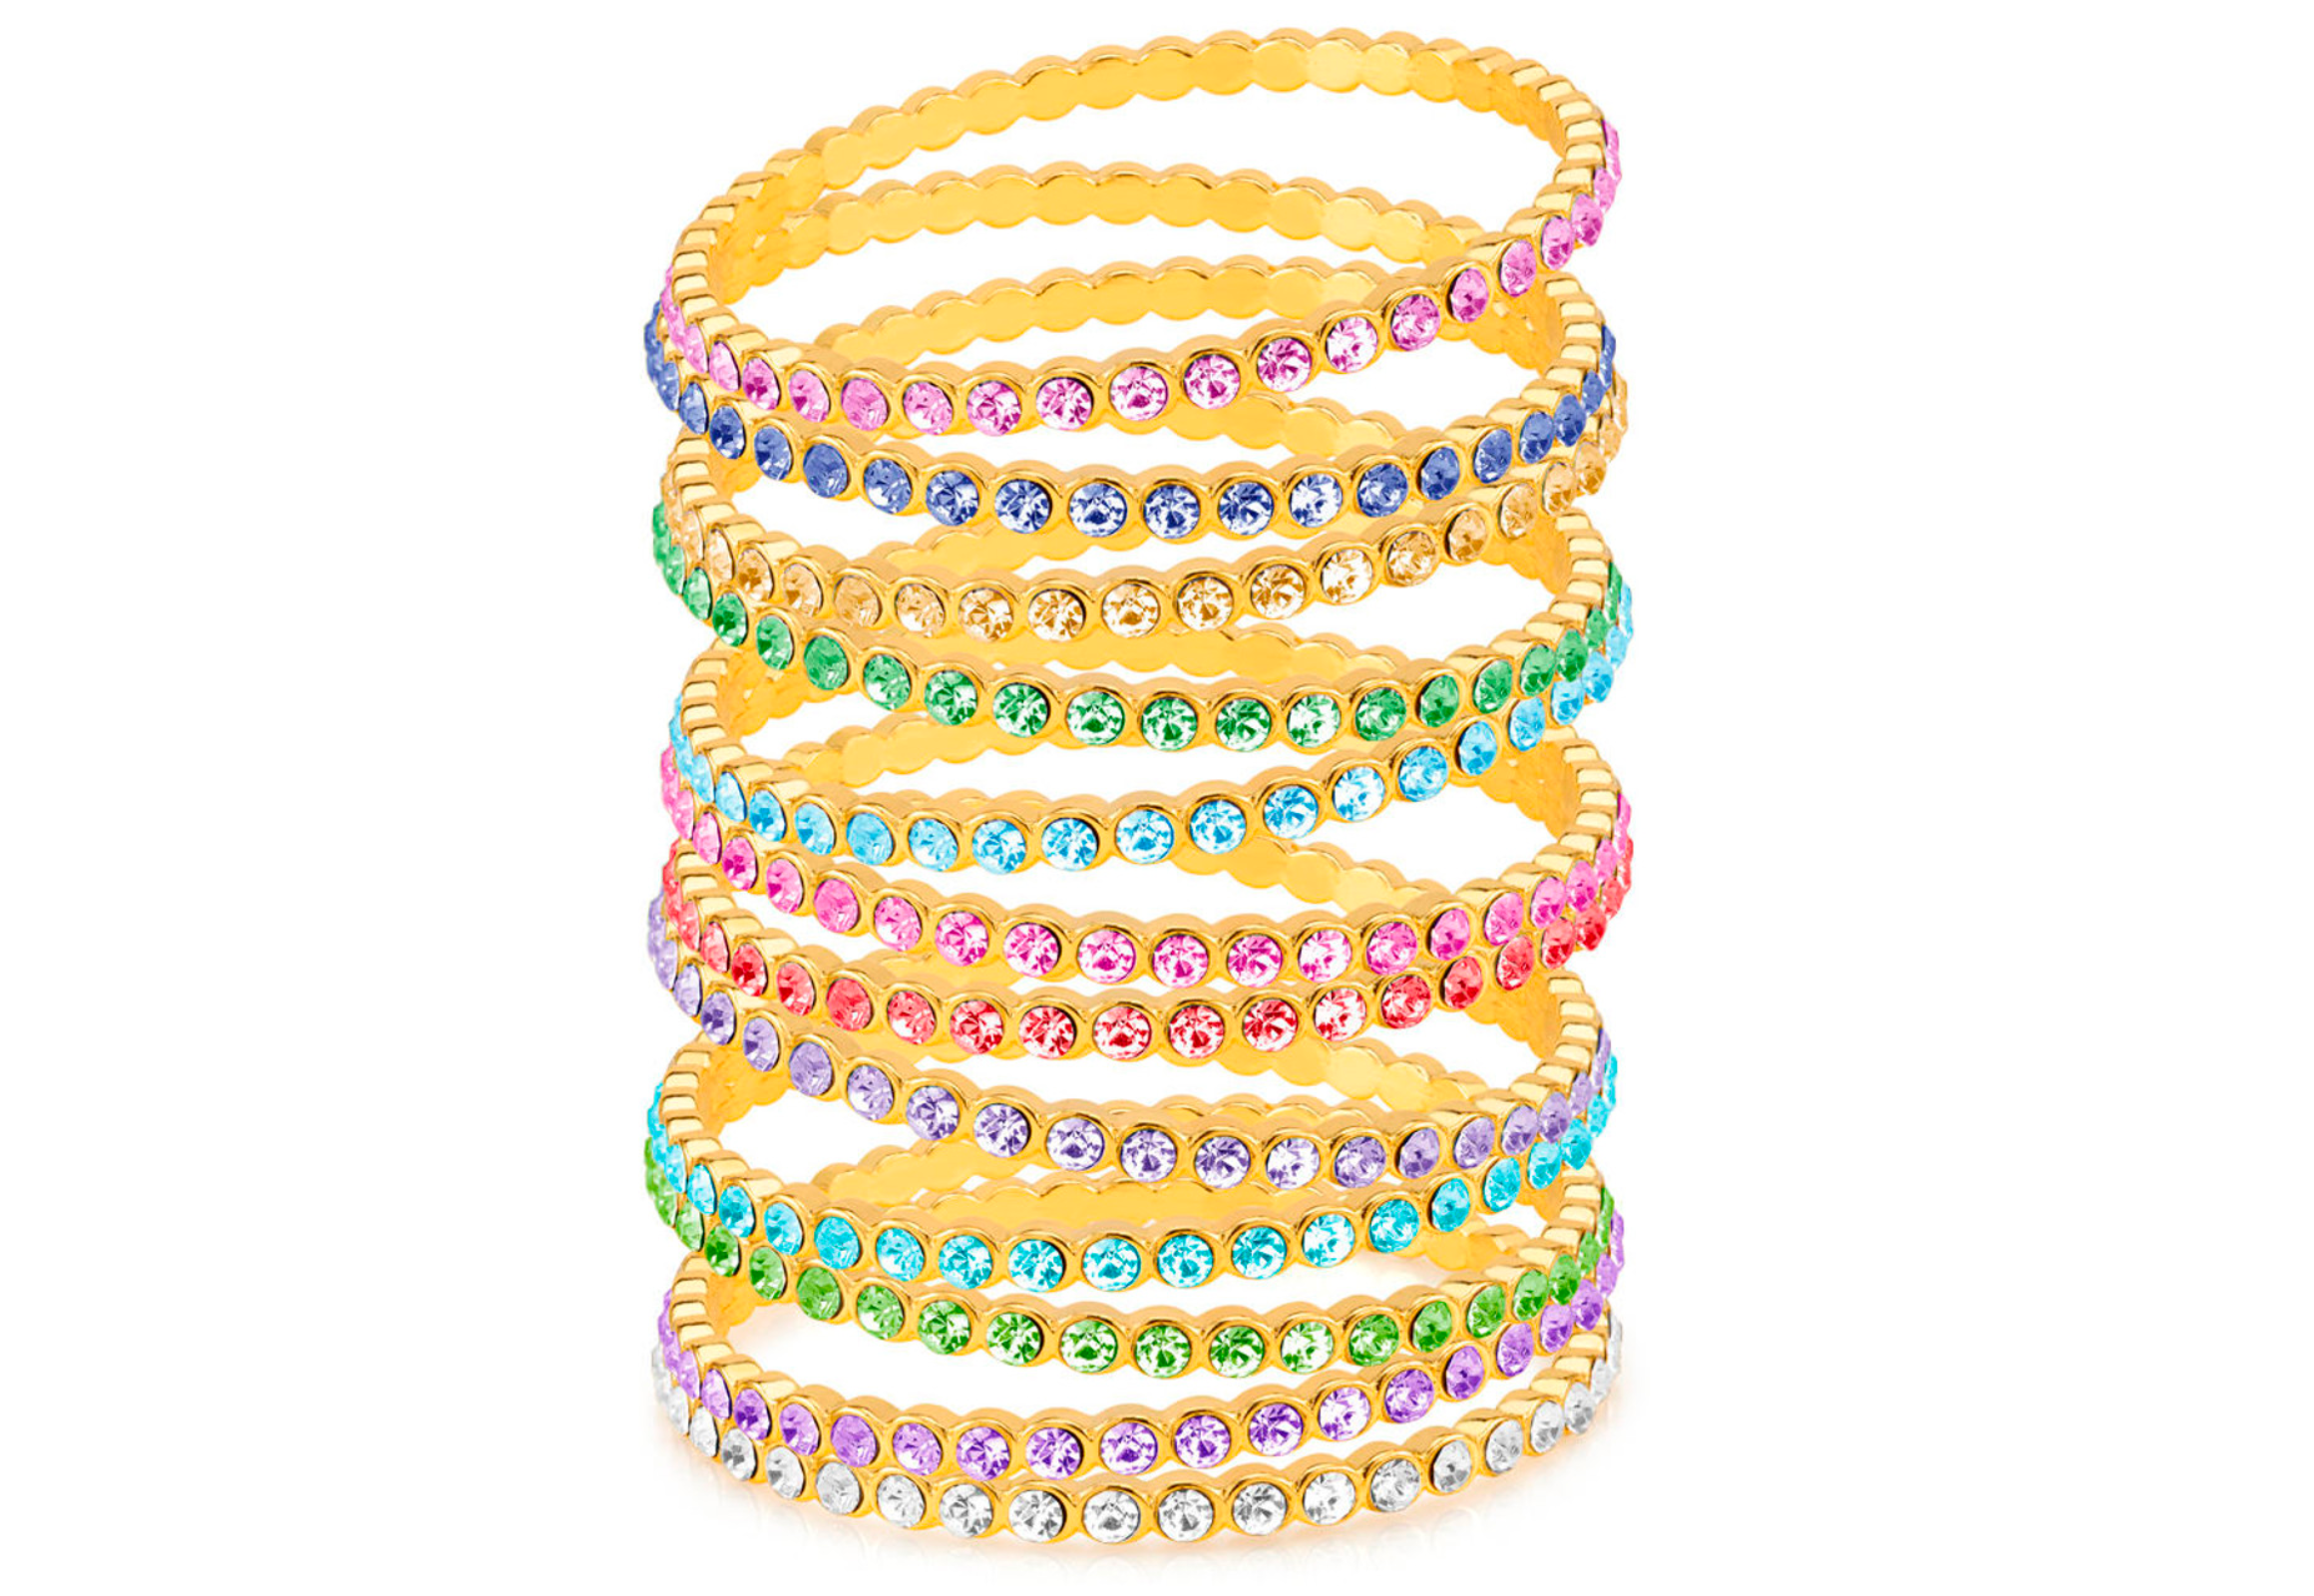 Stackable Bangles